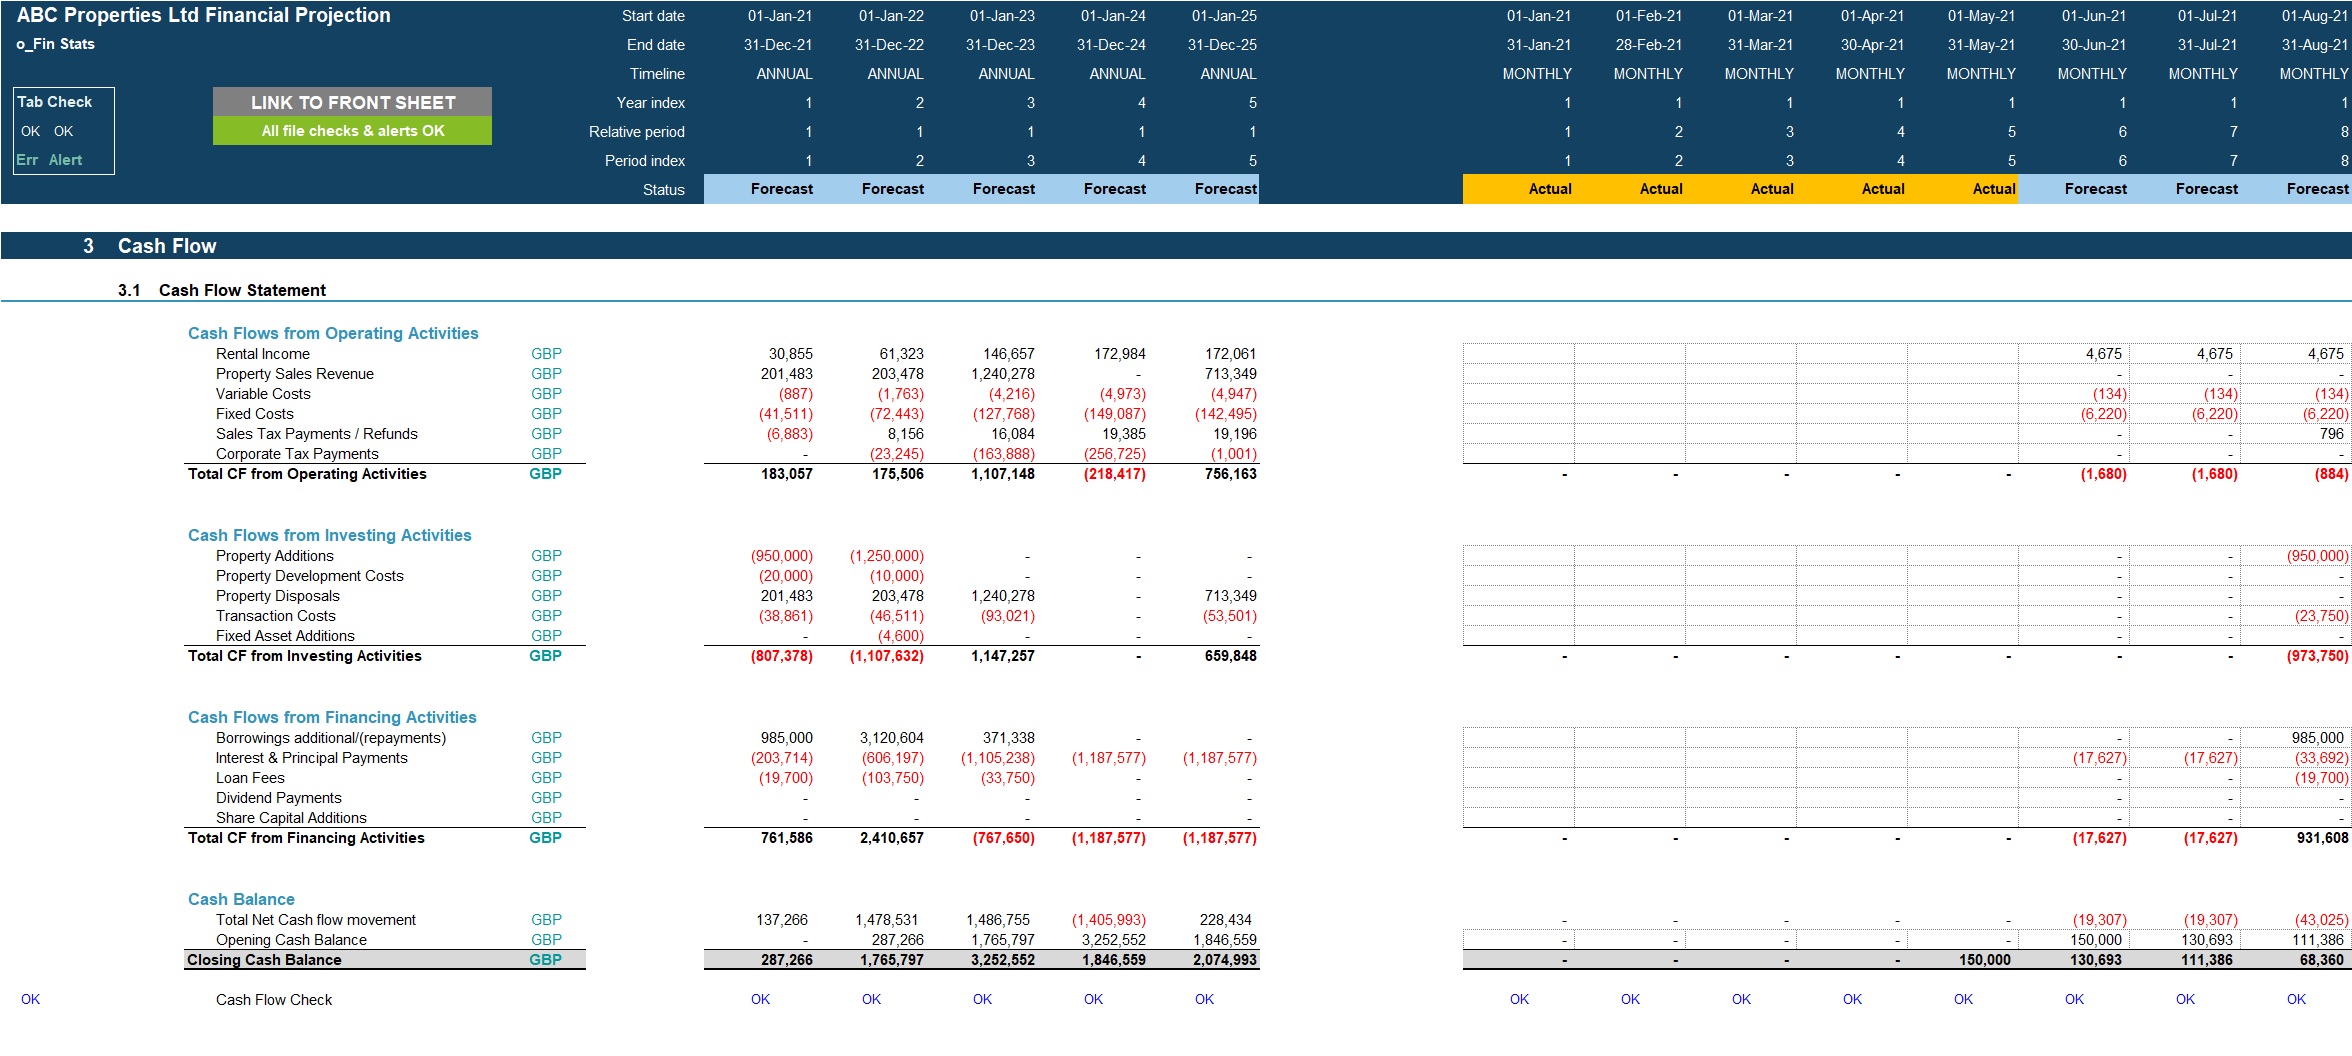 Buy, Rehab, Rent, Refinance, Repeat (BRRRR) Real Estate Investment 3 Statement Model (Excel template (XLSX)) Preview Image